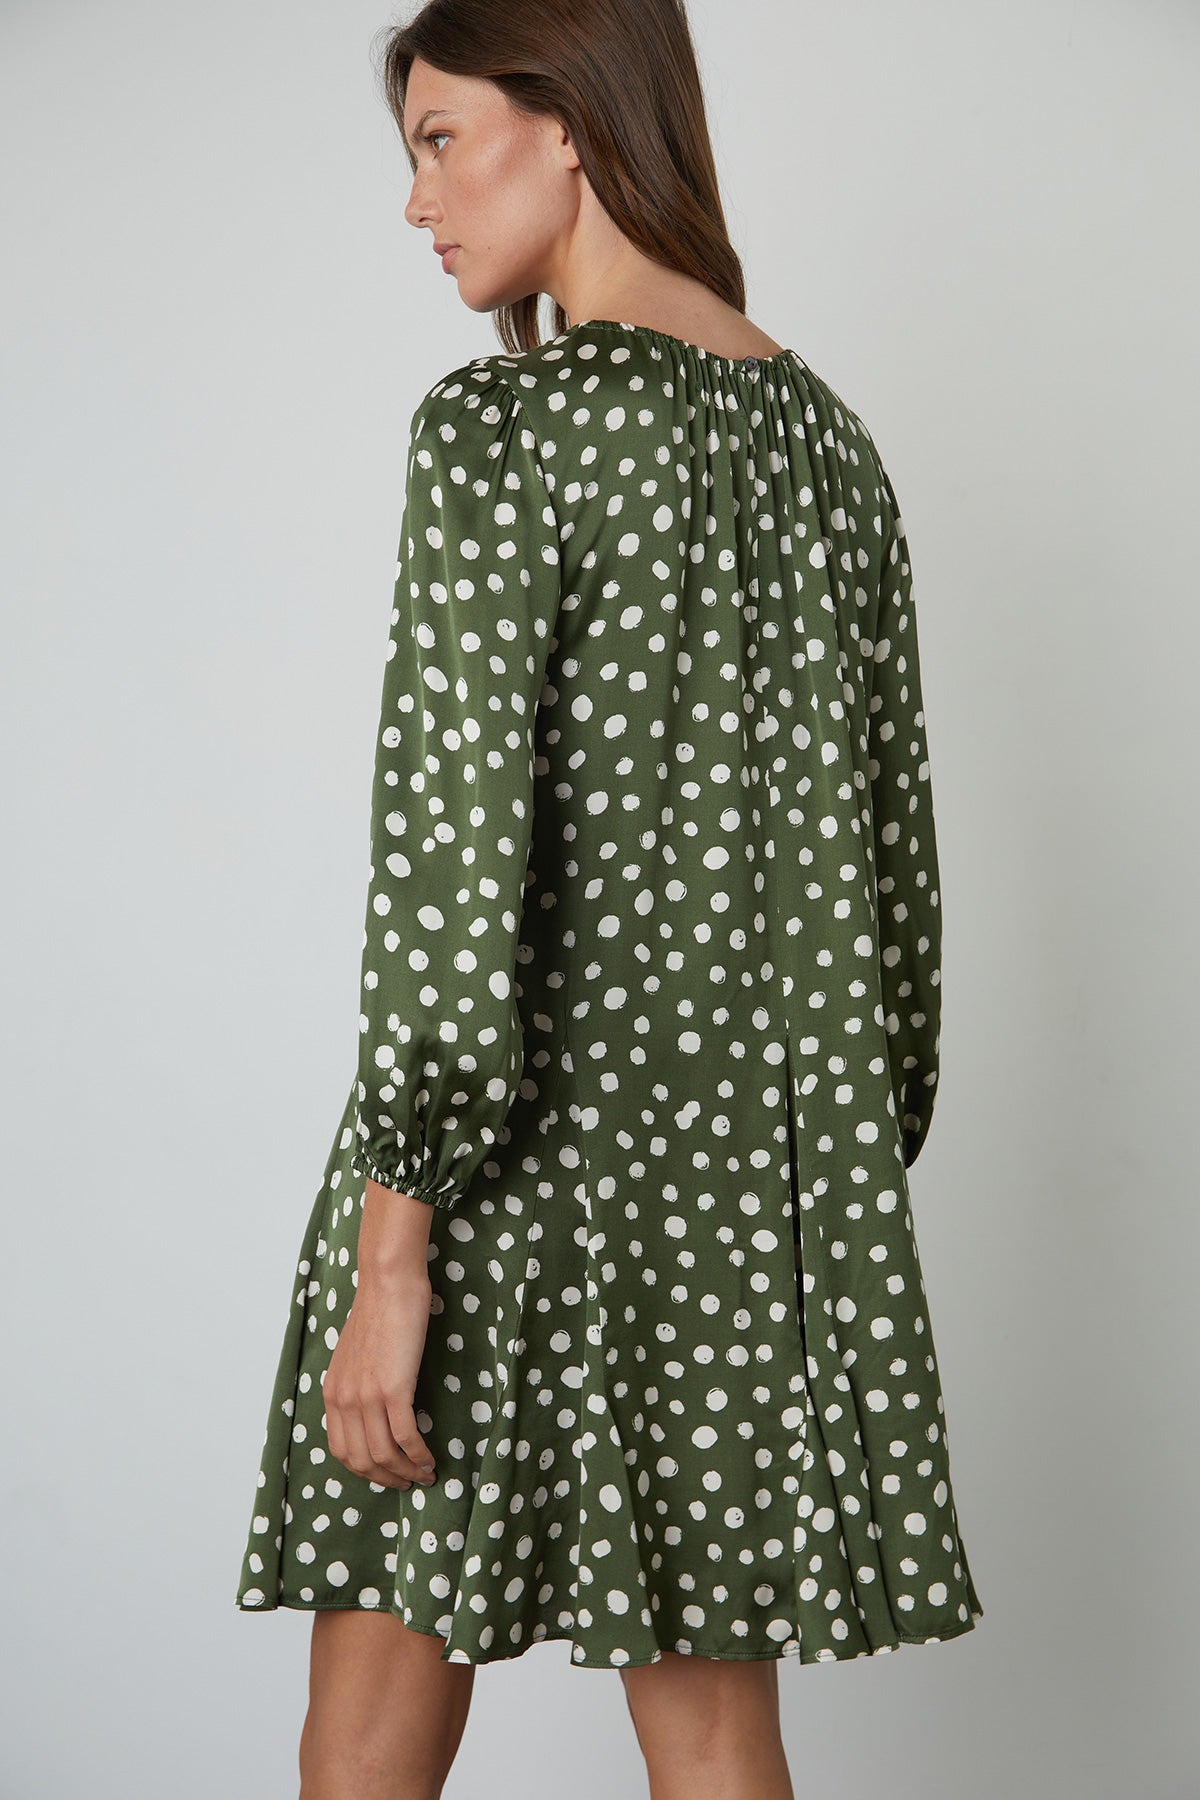   Kenia Polka Dot Dress with Green Background and Cream Dots Back 